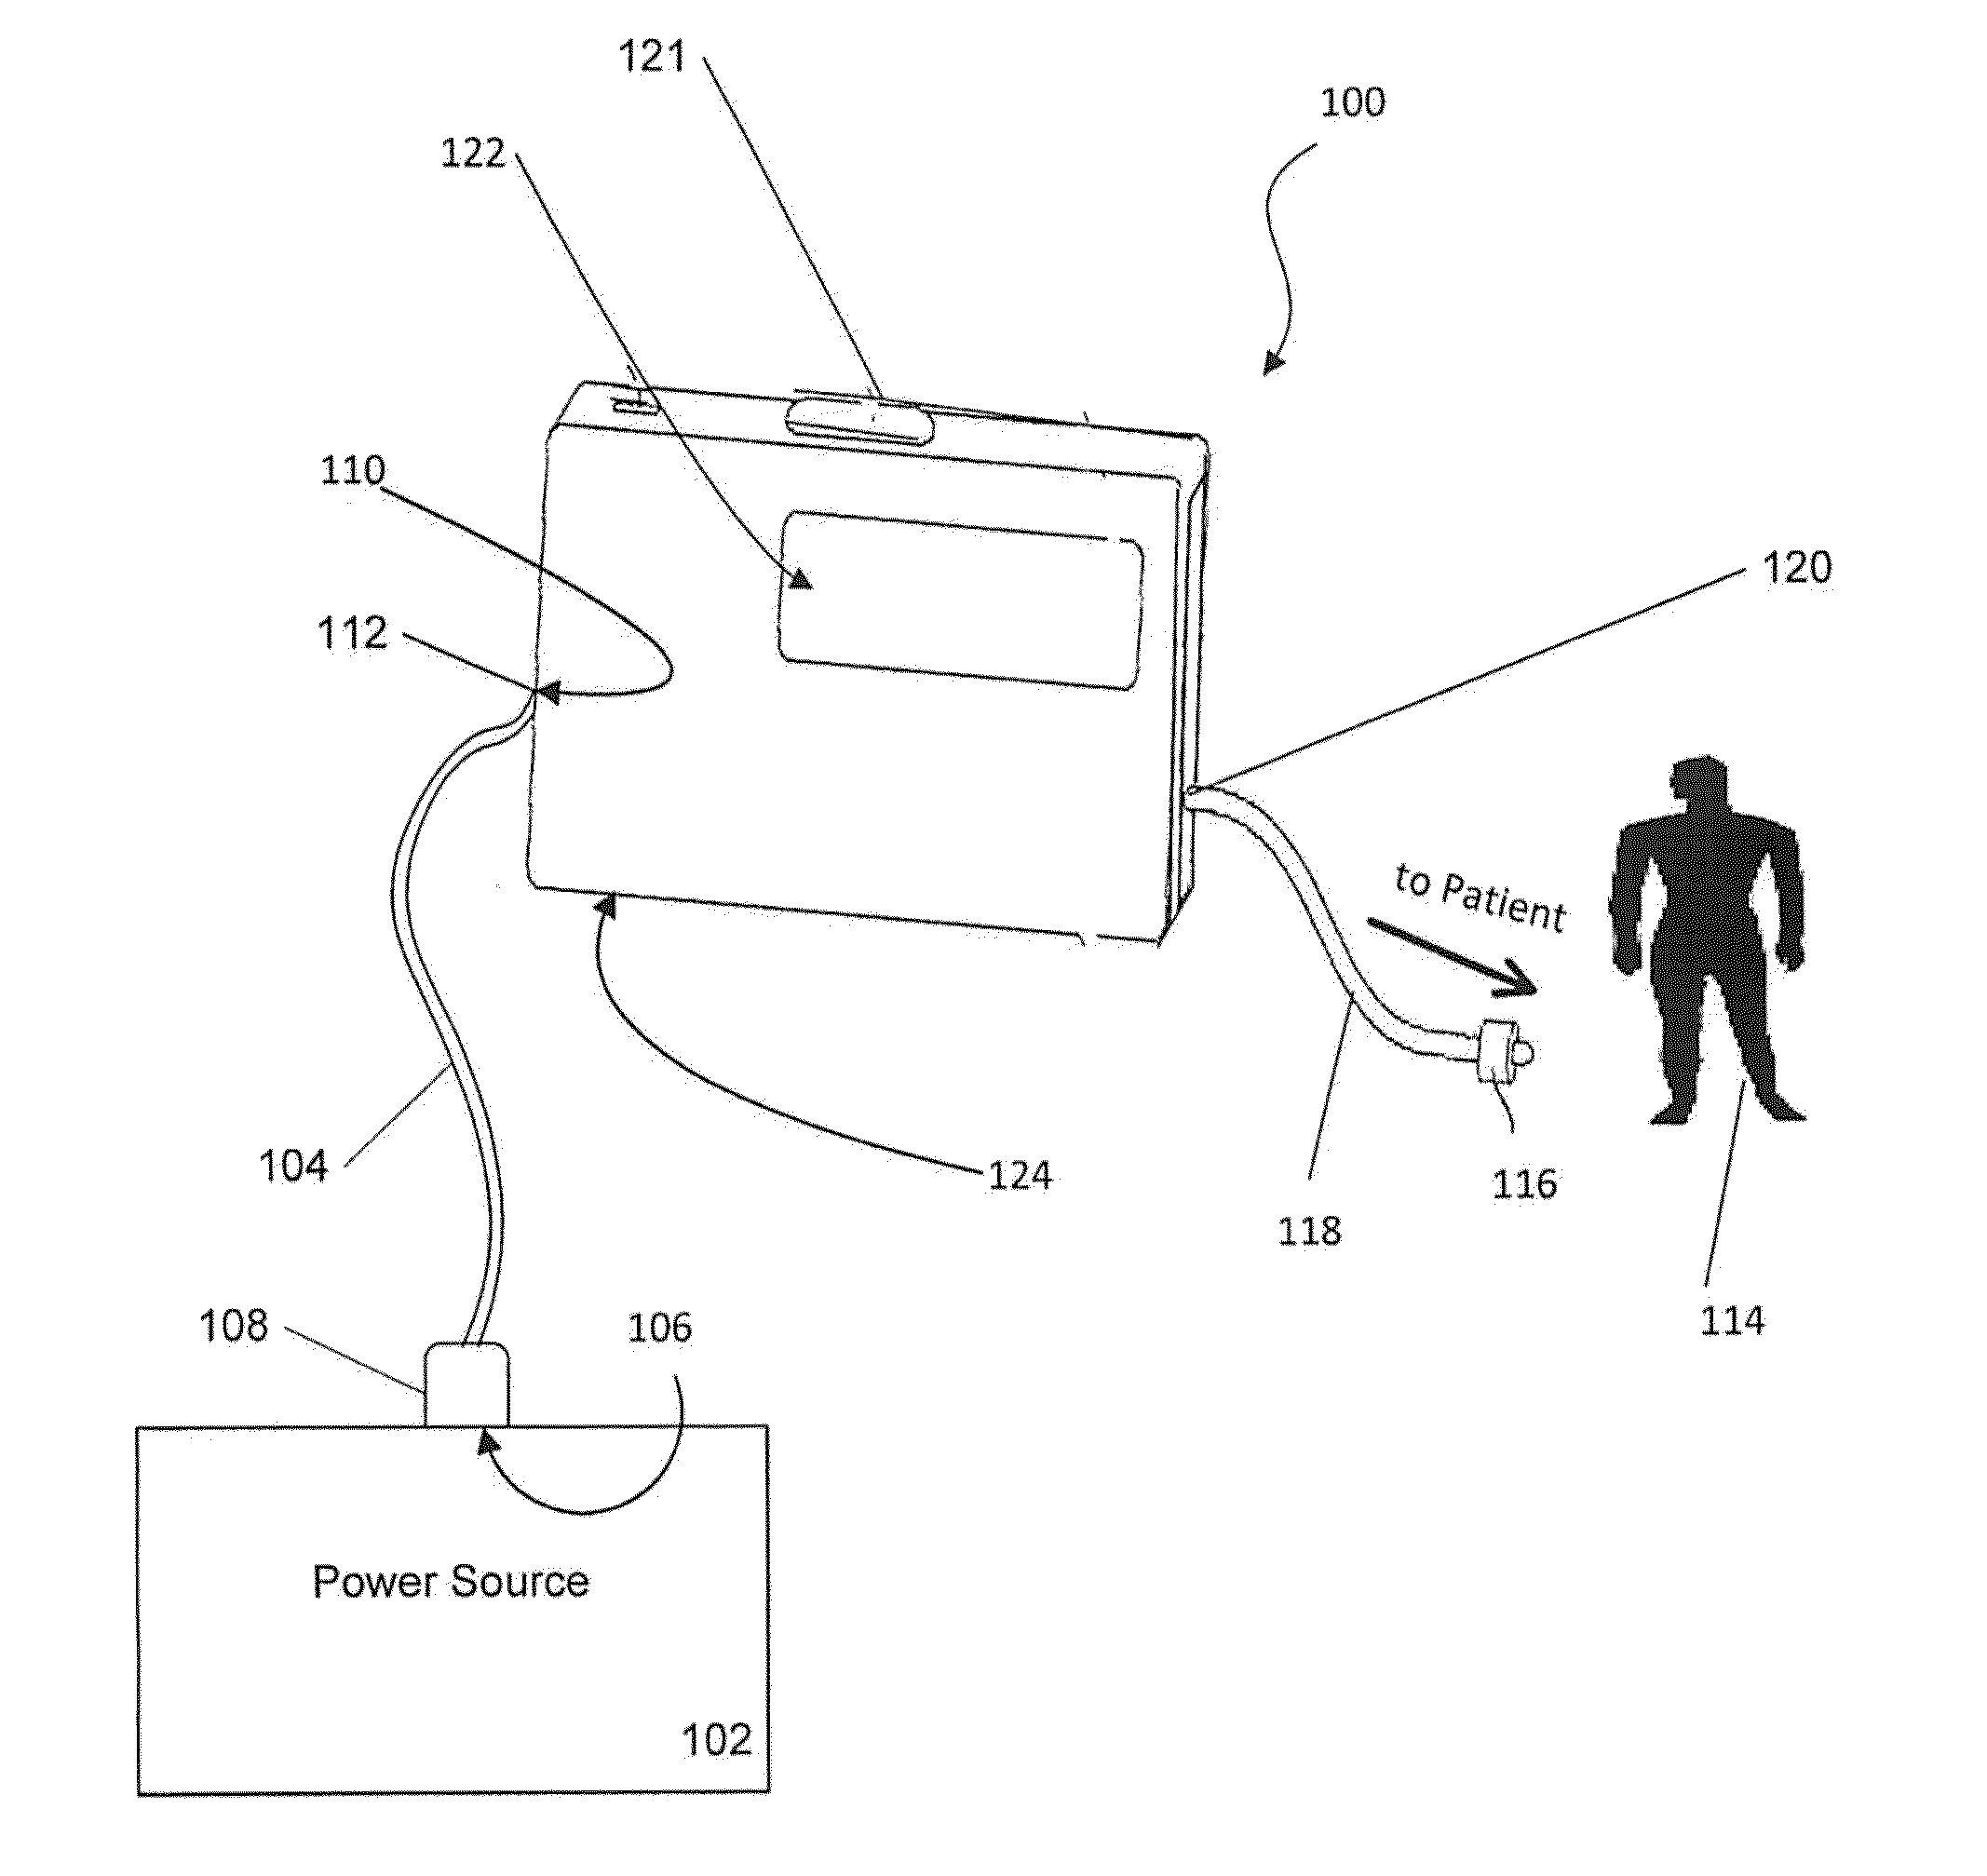 Sealed infusion device with electrical connector port